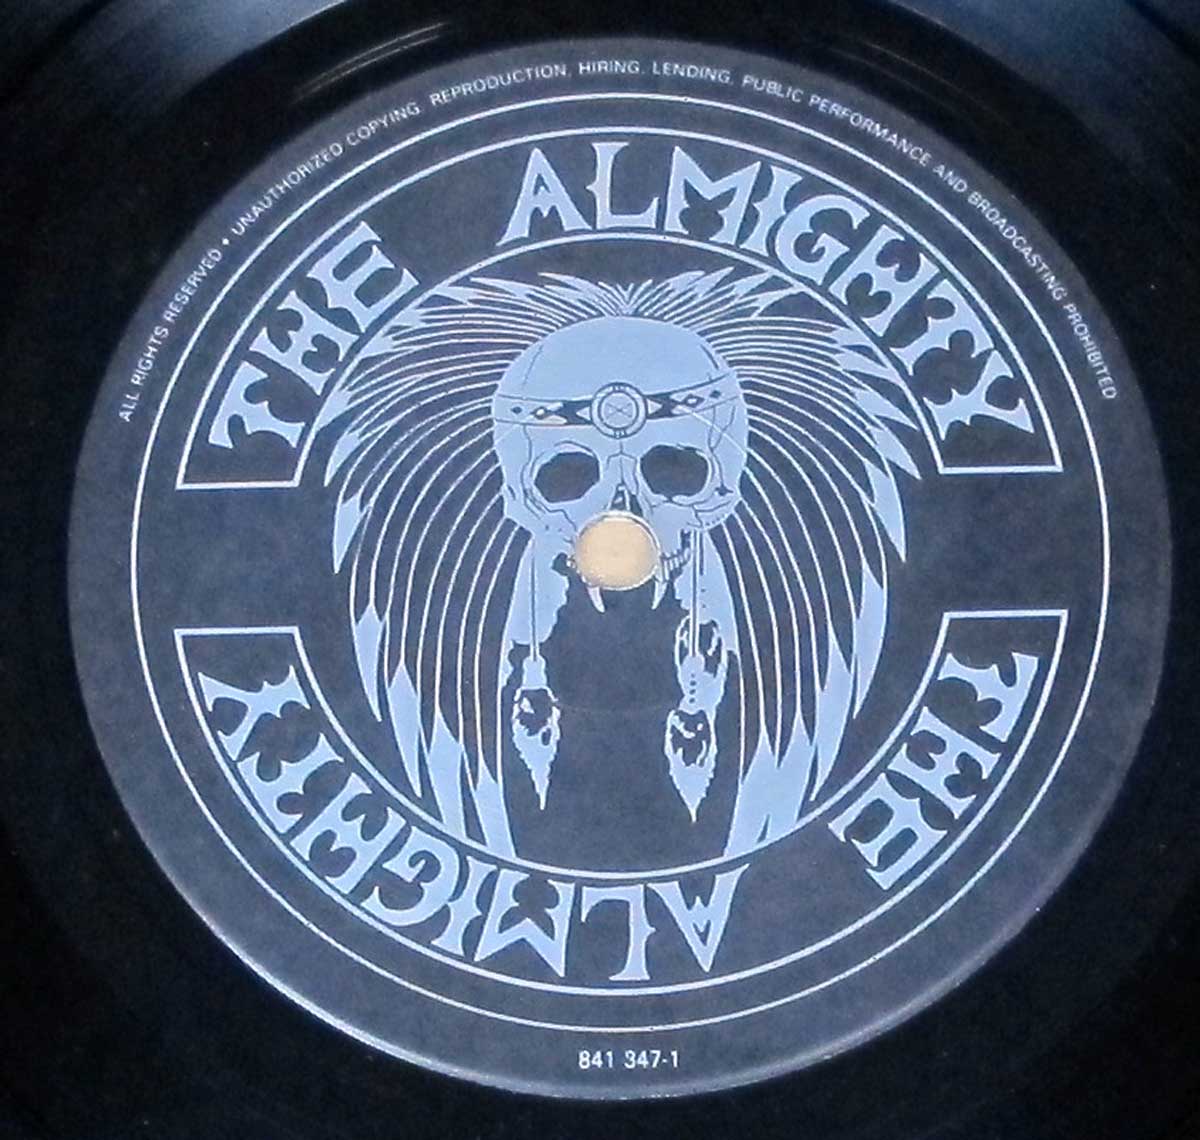 Enlarged High Resolution Photo of the Record's label THE ALMIGHTY - Blood, Fire & Love https://vinyl-records.nl